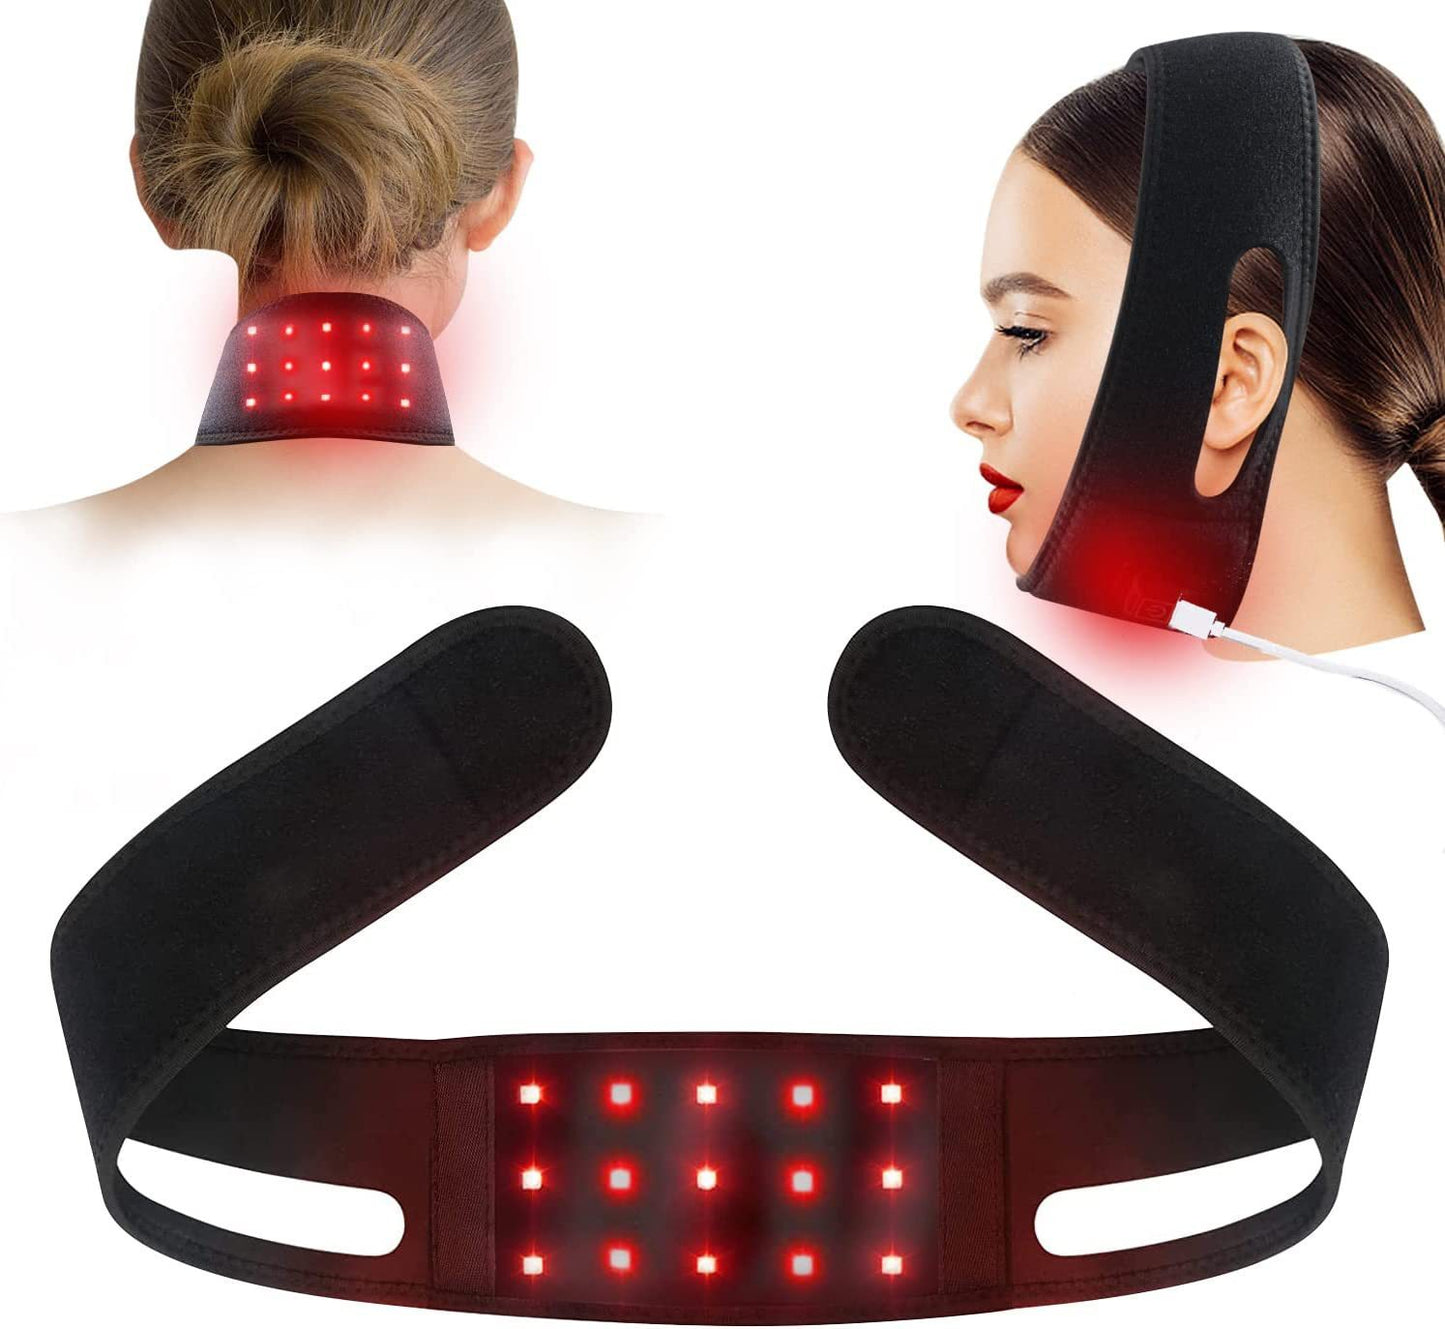 Infrared Therapy Light Strip